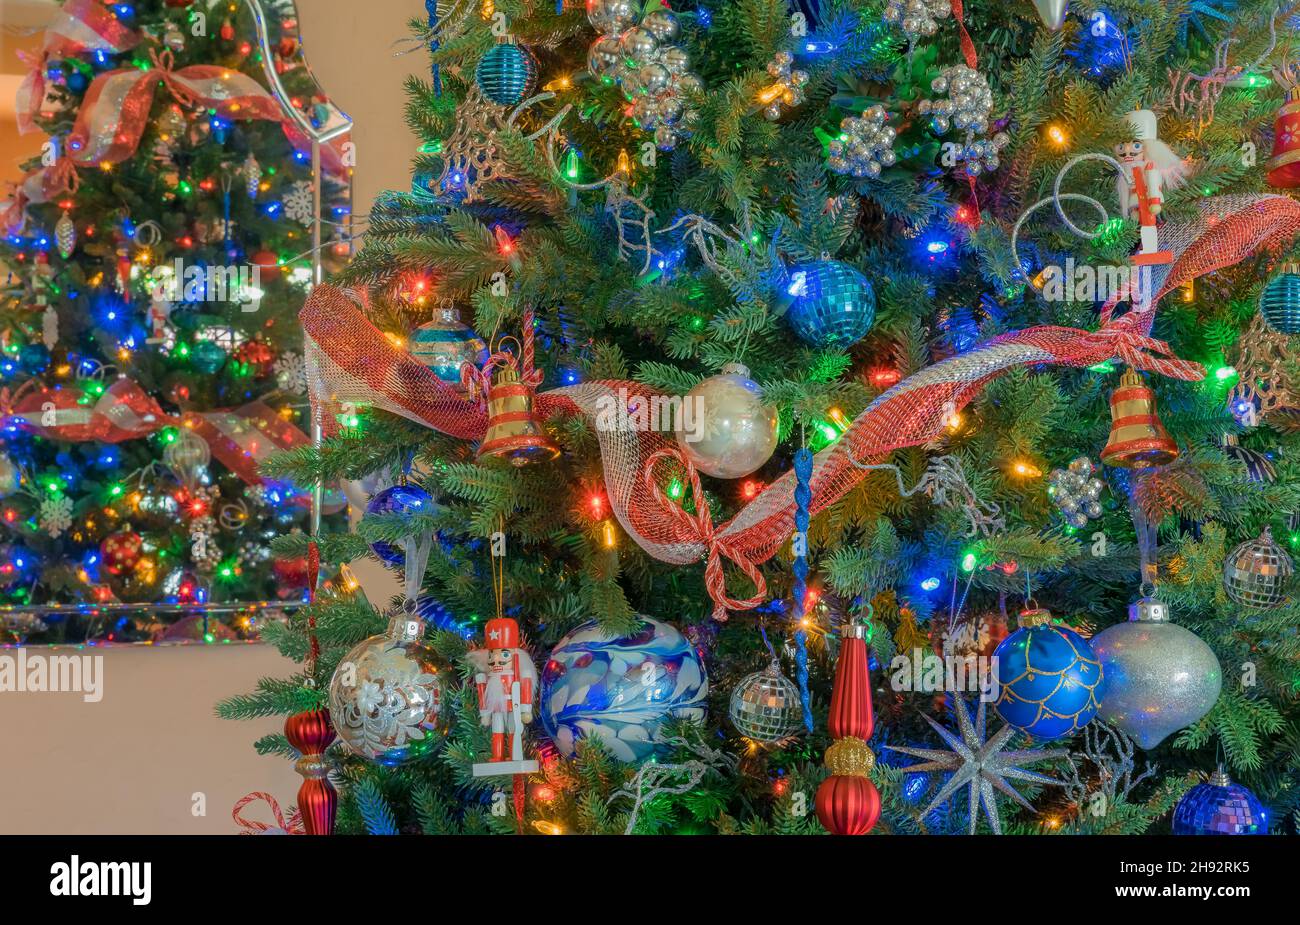 Red, white and blue decorations fill a Christmas tree and are doubled by the reflection in the mirror. Stock Photo